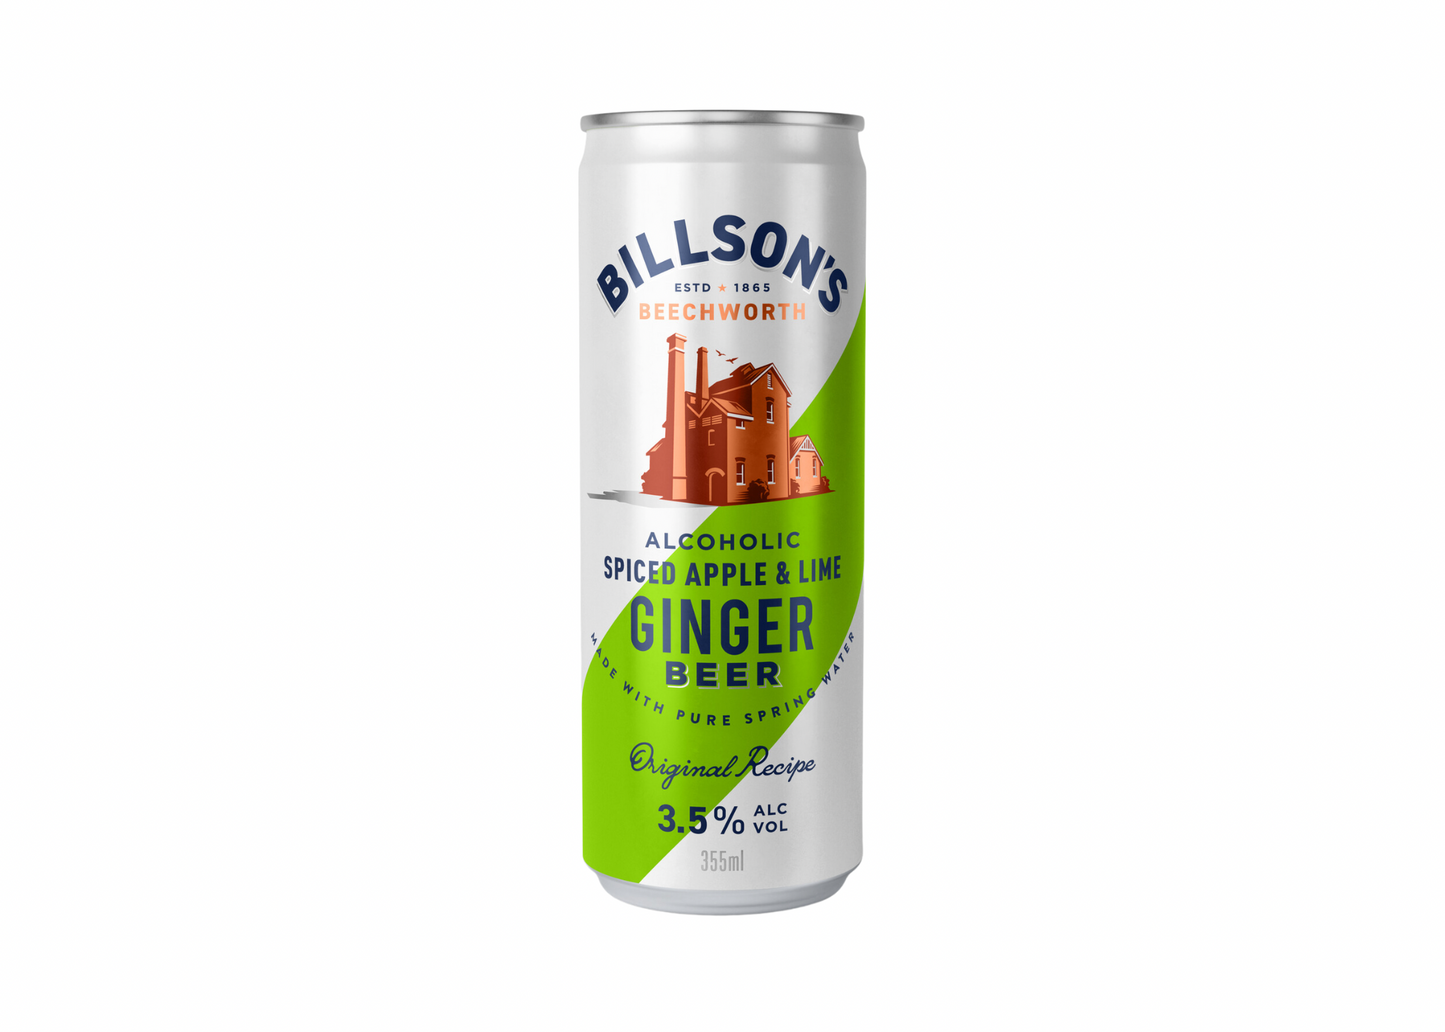 Billson's Alcoholic Ginger Beer with Spiced Apple & Lime 355ml